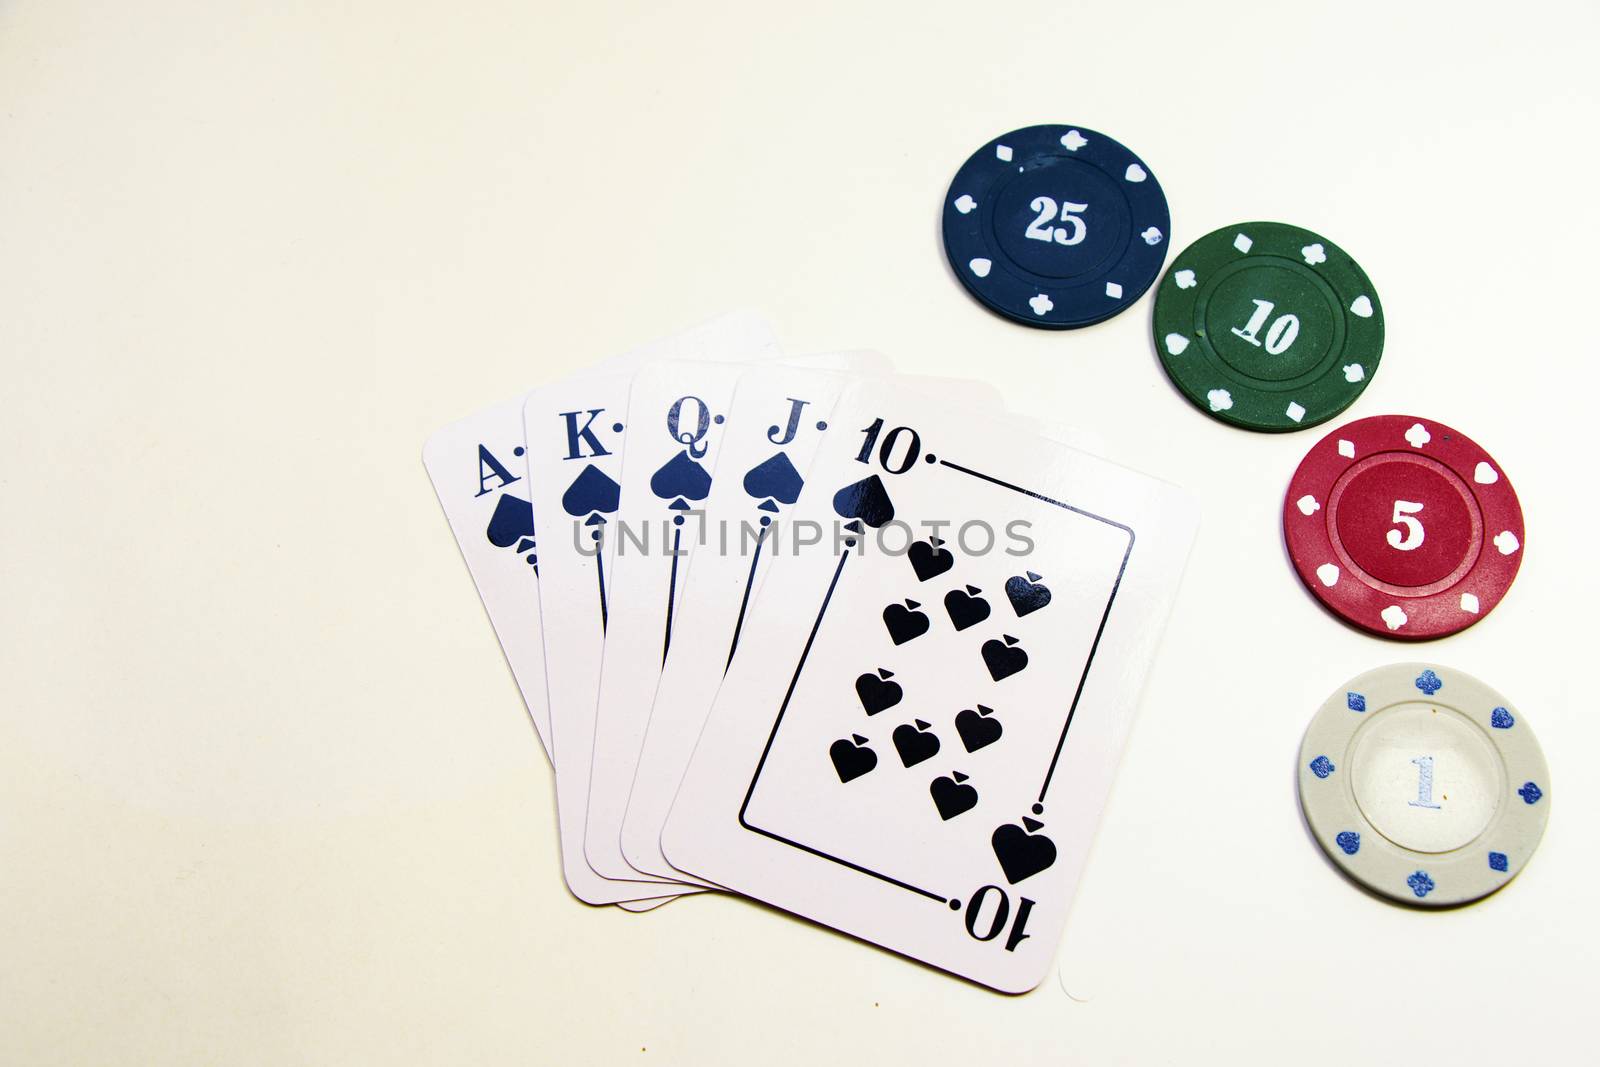 Royal flush poker and blackjack cards and chips by Taidundua